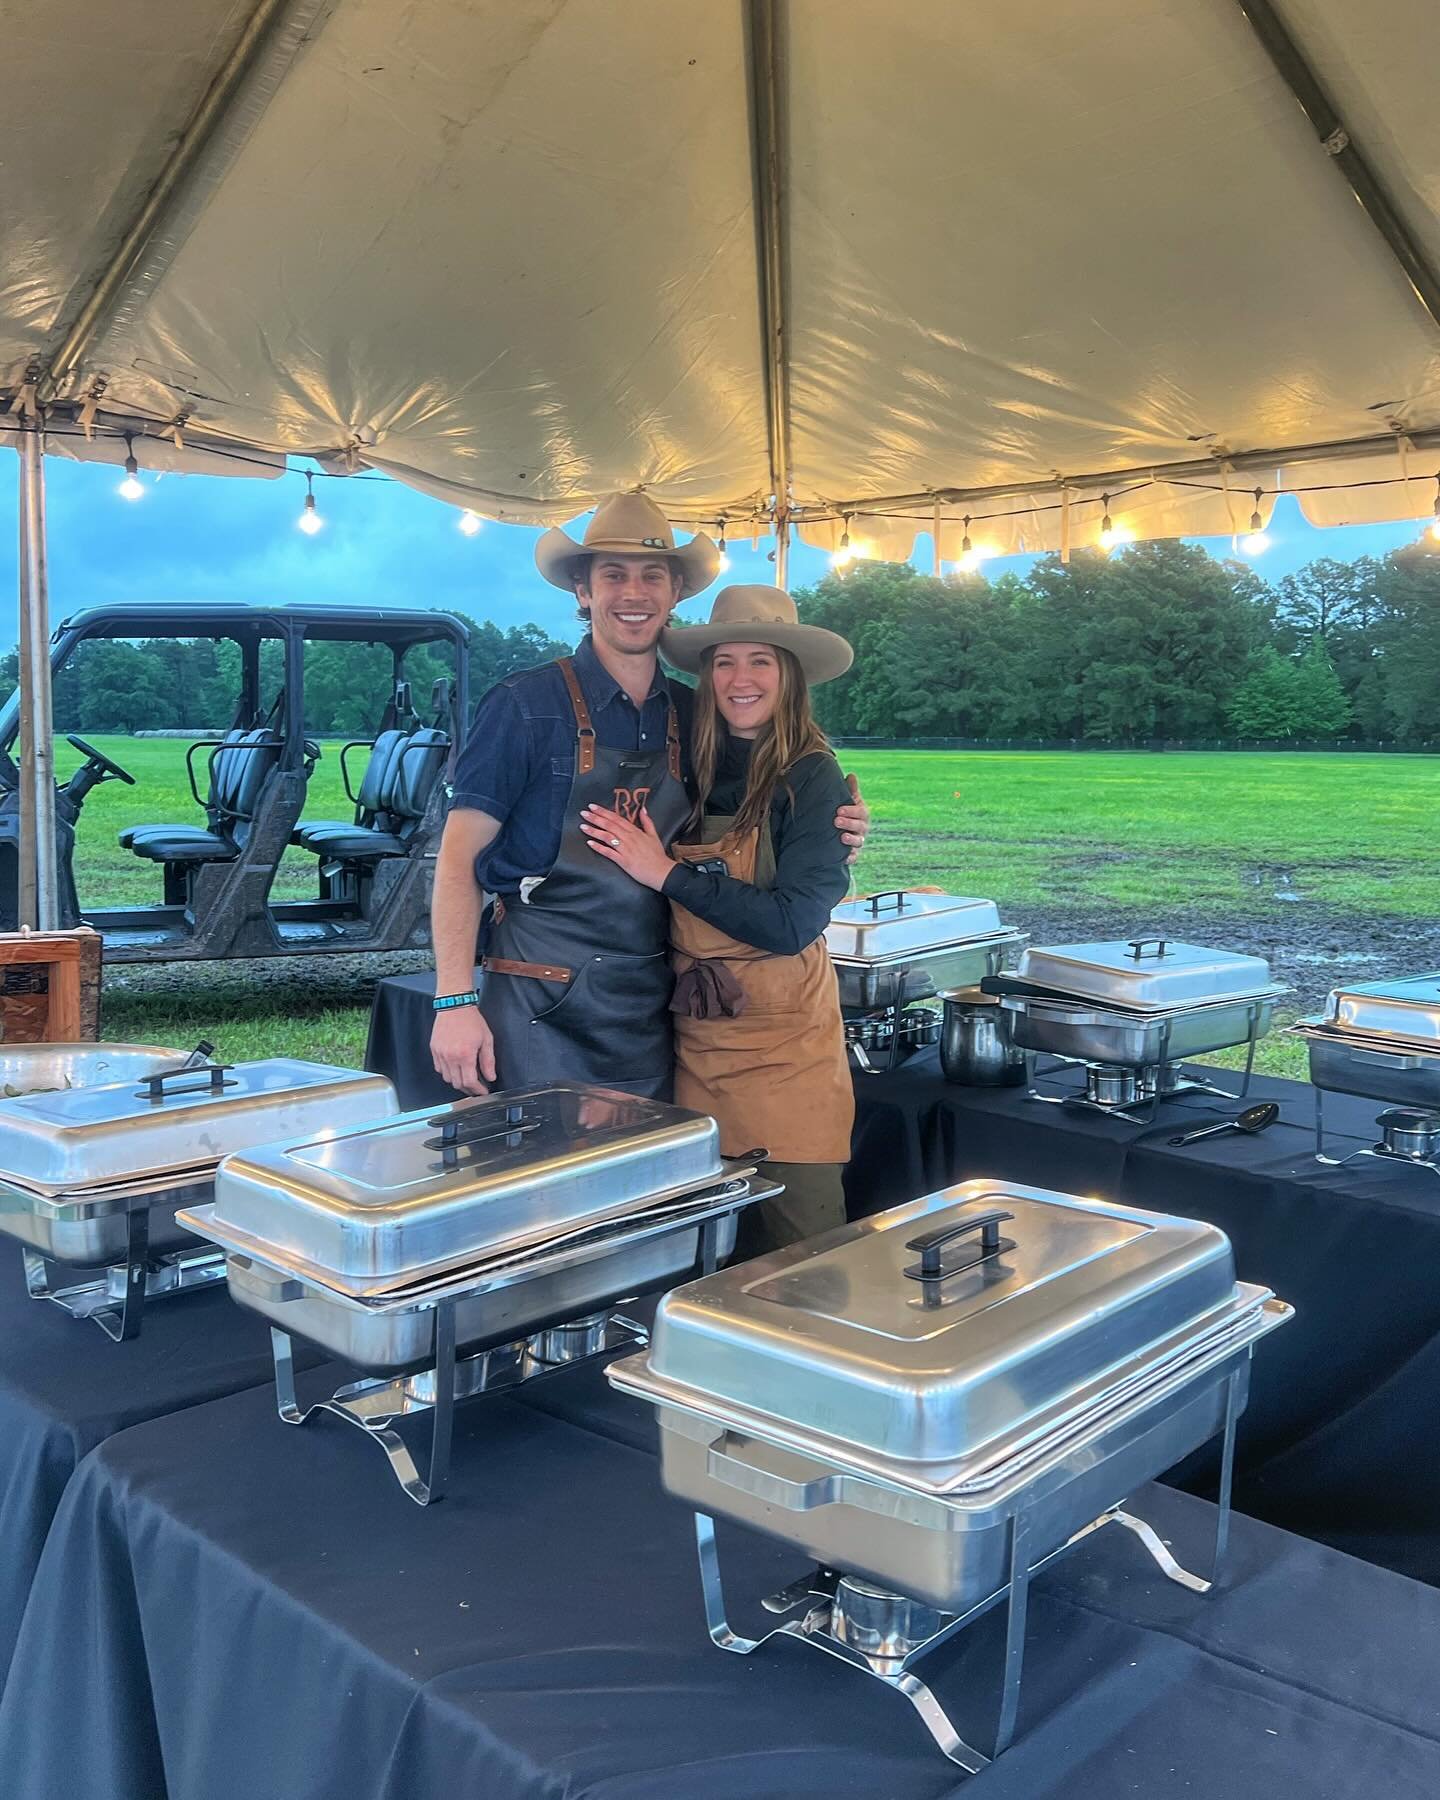 Despite the torrential downpour, Party in the Pines 2024 was a great success! My team and I served some damn wicked fried chicken, BBQ, and sides to over 200 including @paulcauthen and band. Huge thanks to @smeisel2 and @alexmeisel for having us out!